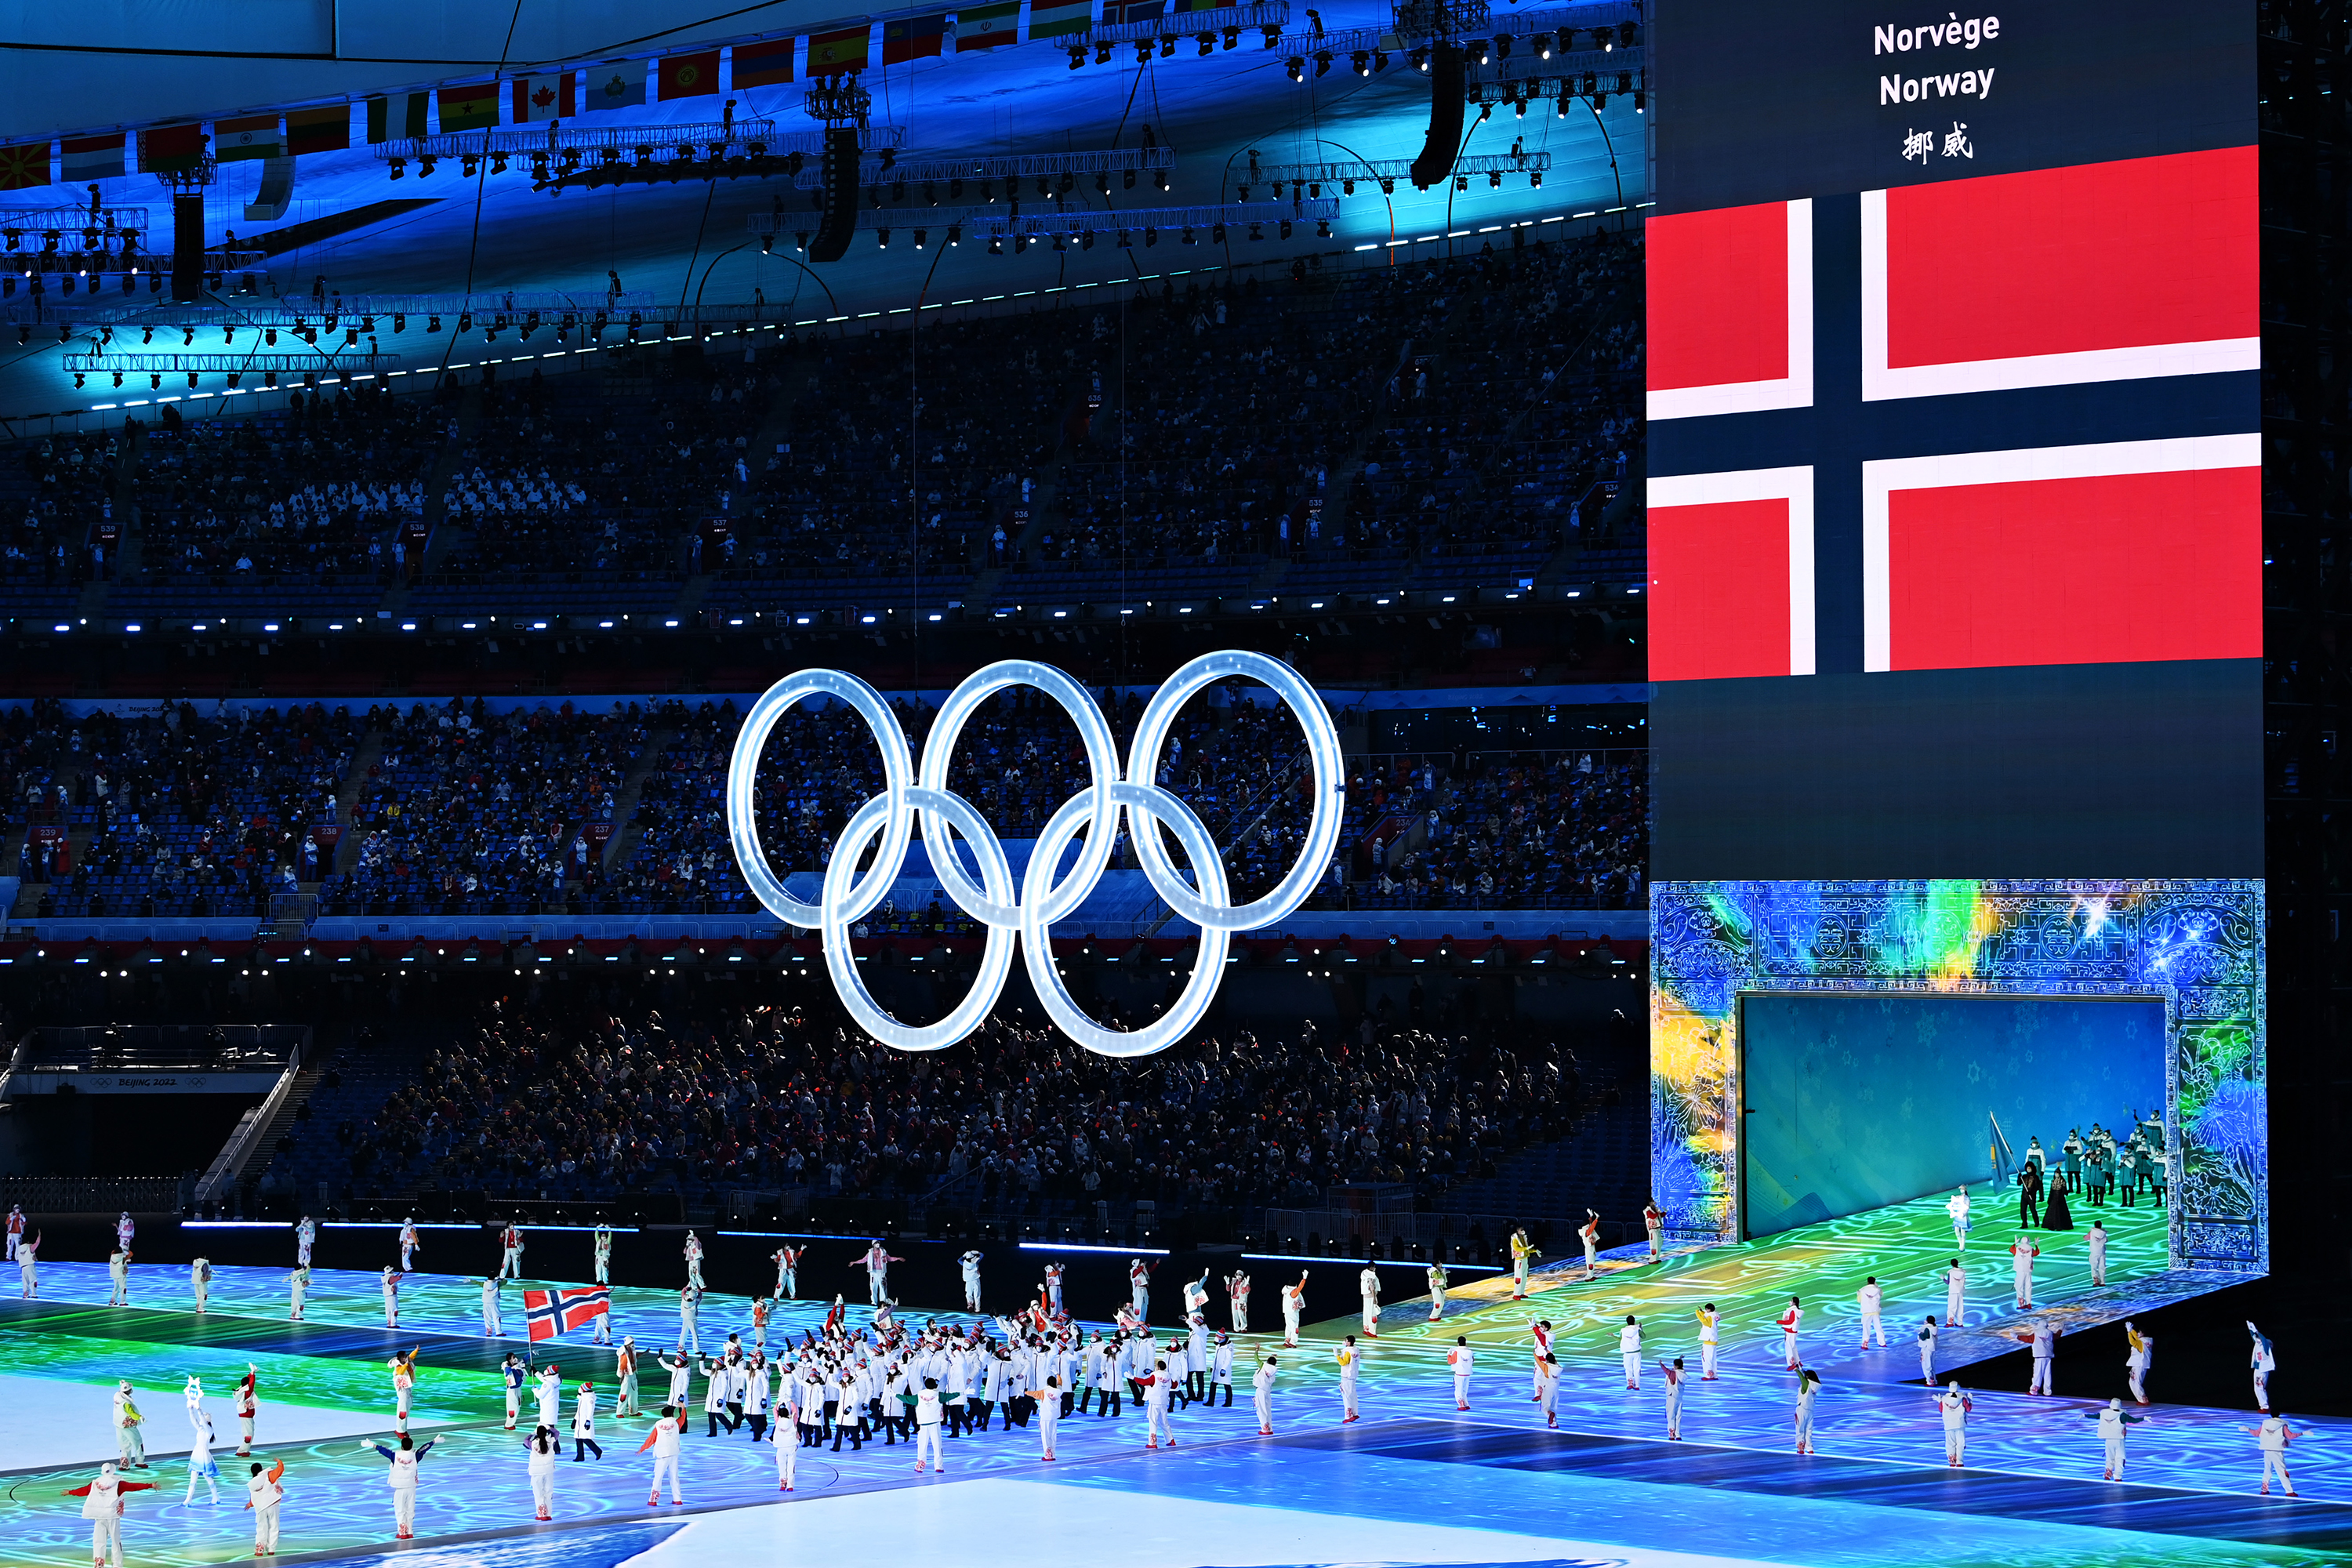 Norway won 16 gold medals which represents the most ever won at a single Winter Games.